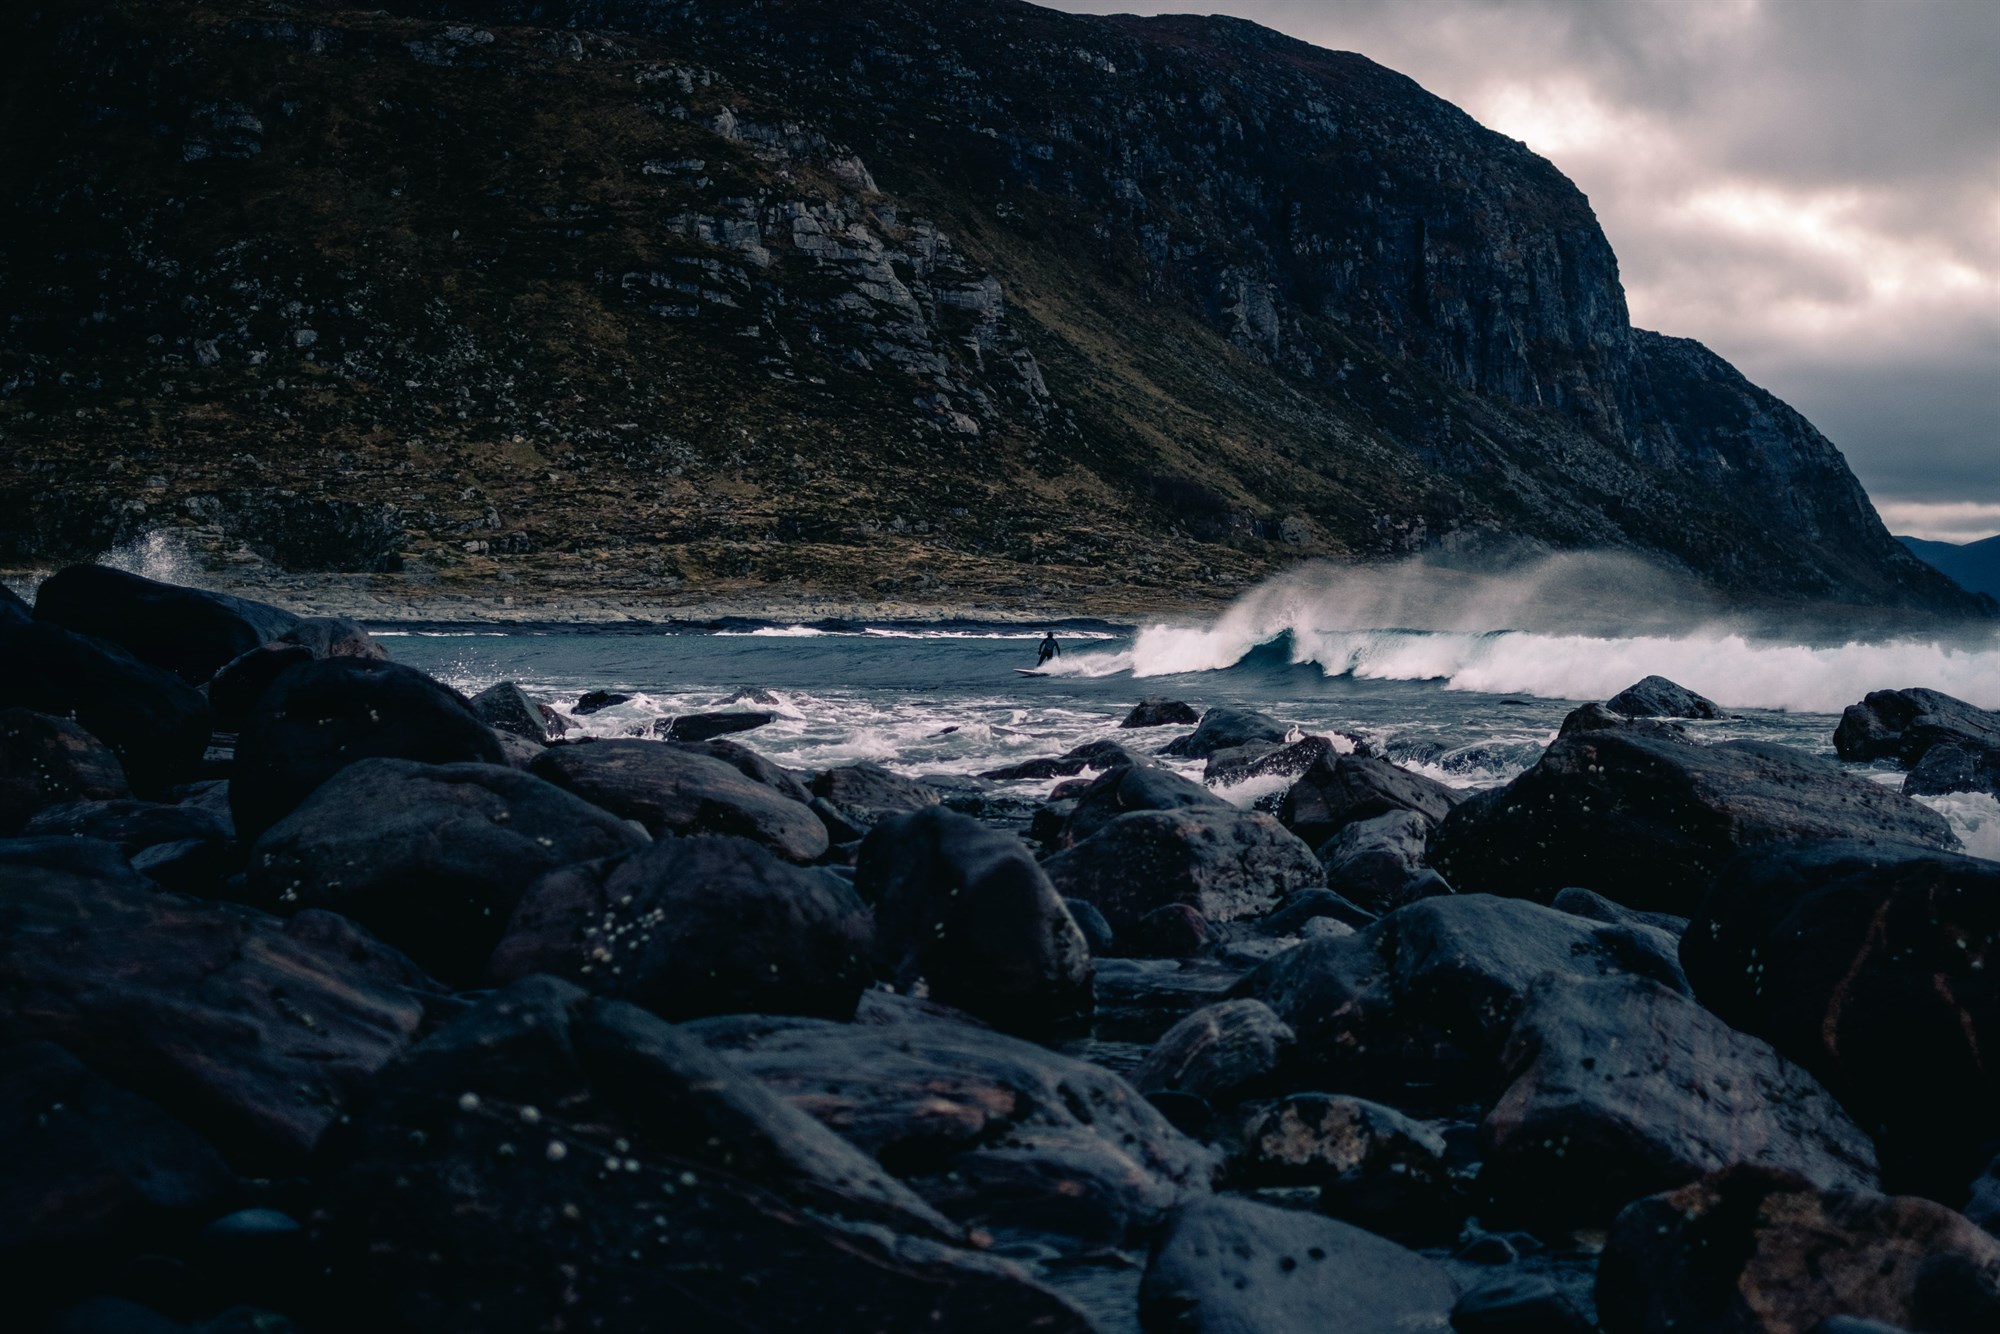 A surfer surrounded by the dramatic, dark volcanic rock in Iceland.